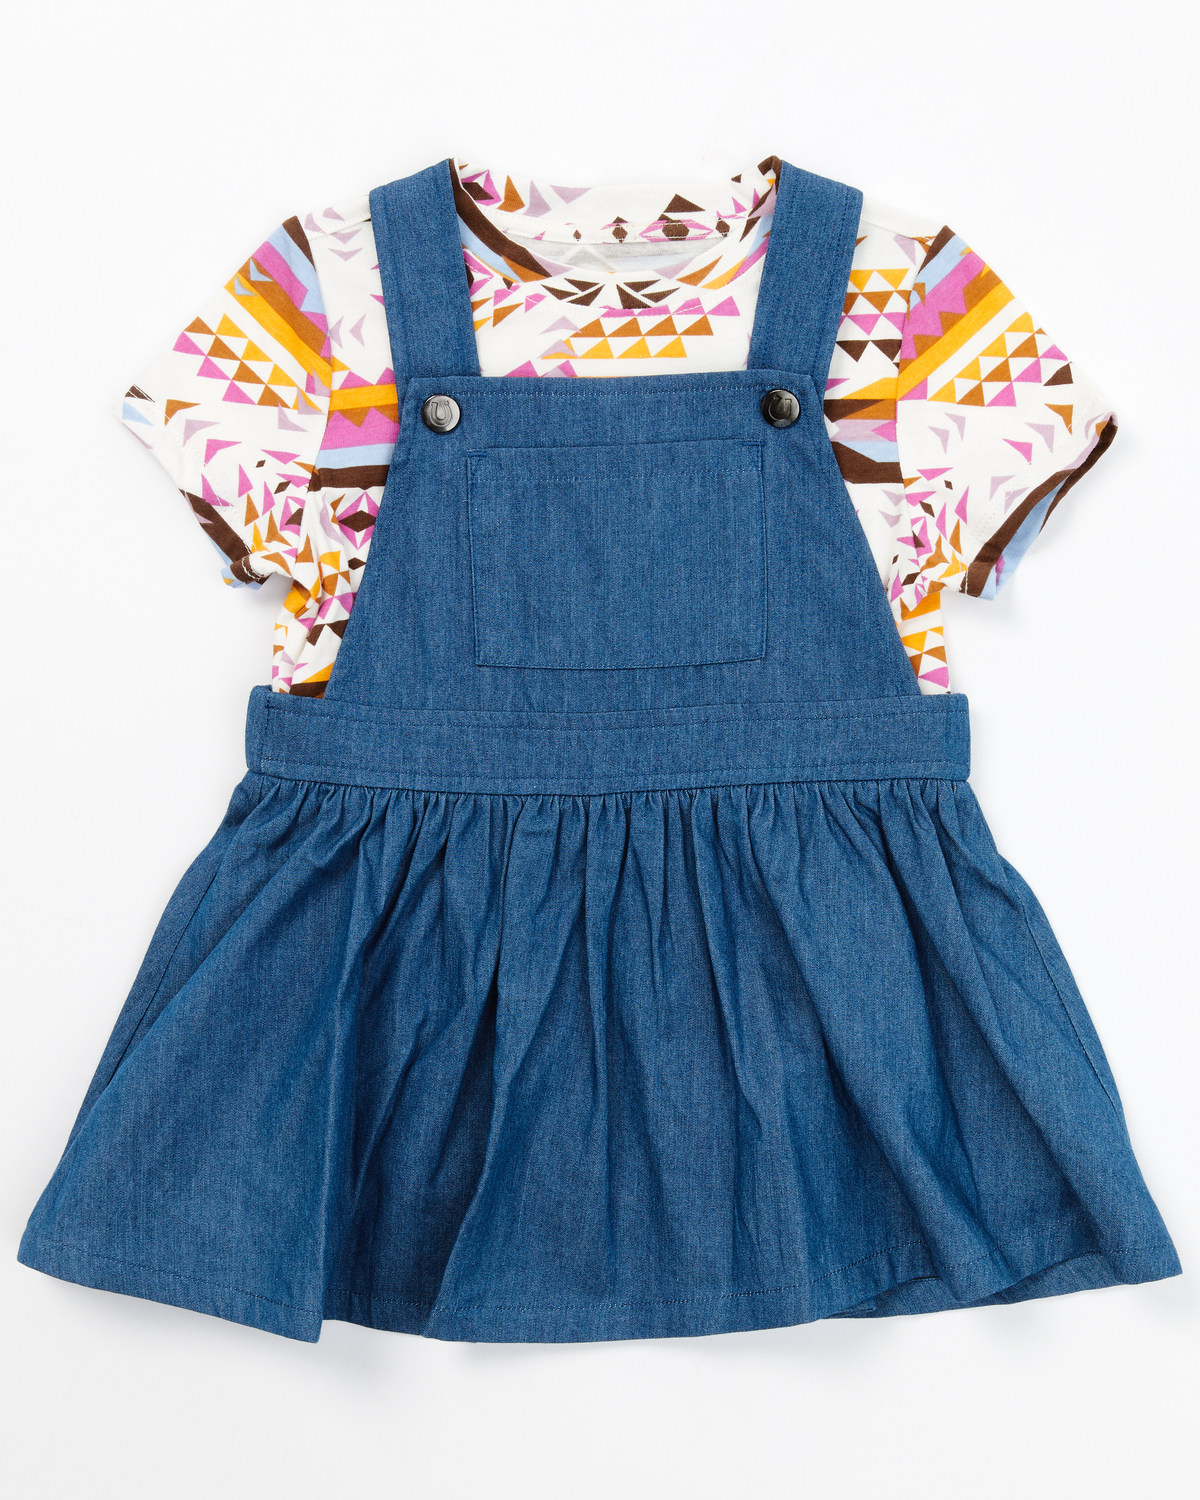 Shyanne Toddler Girls' Southwestern Printed Top and Overall Dress